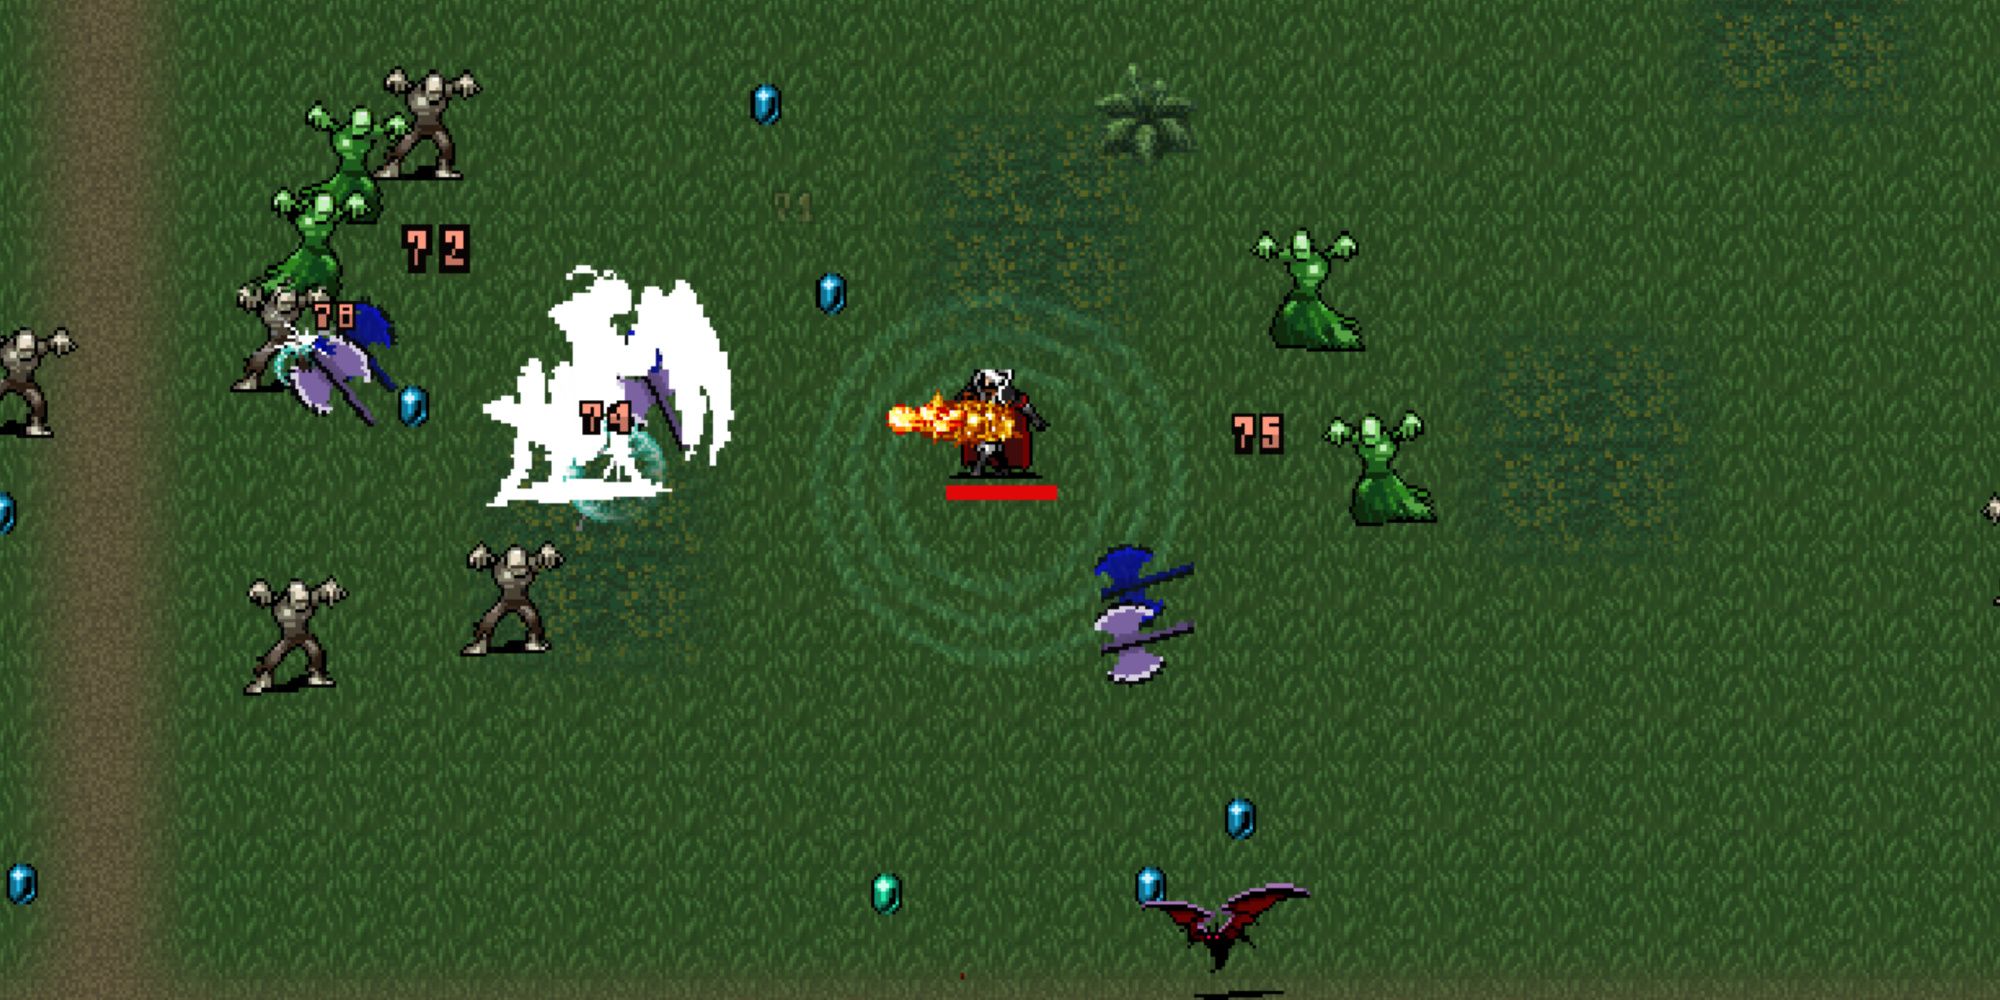 vampire survivors arca attacking a mantis boss with a fire wand on the mad forest level